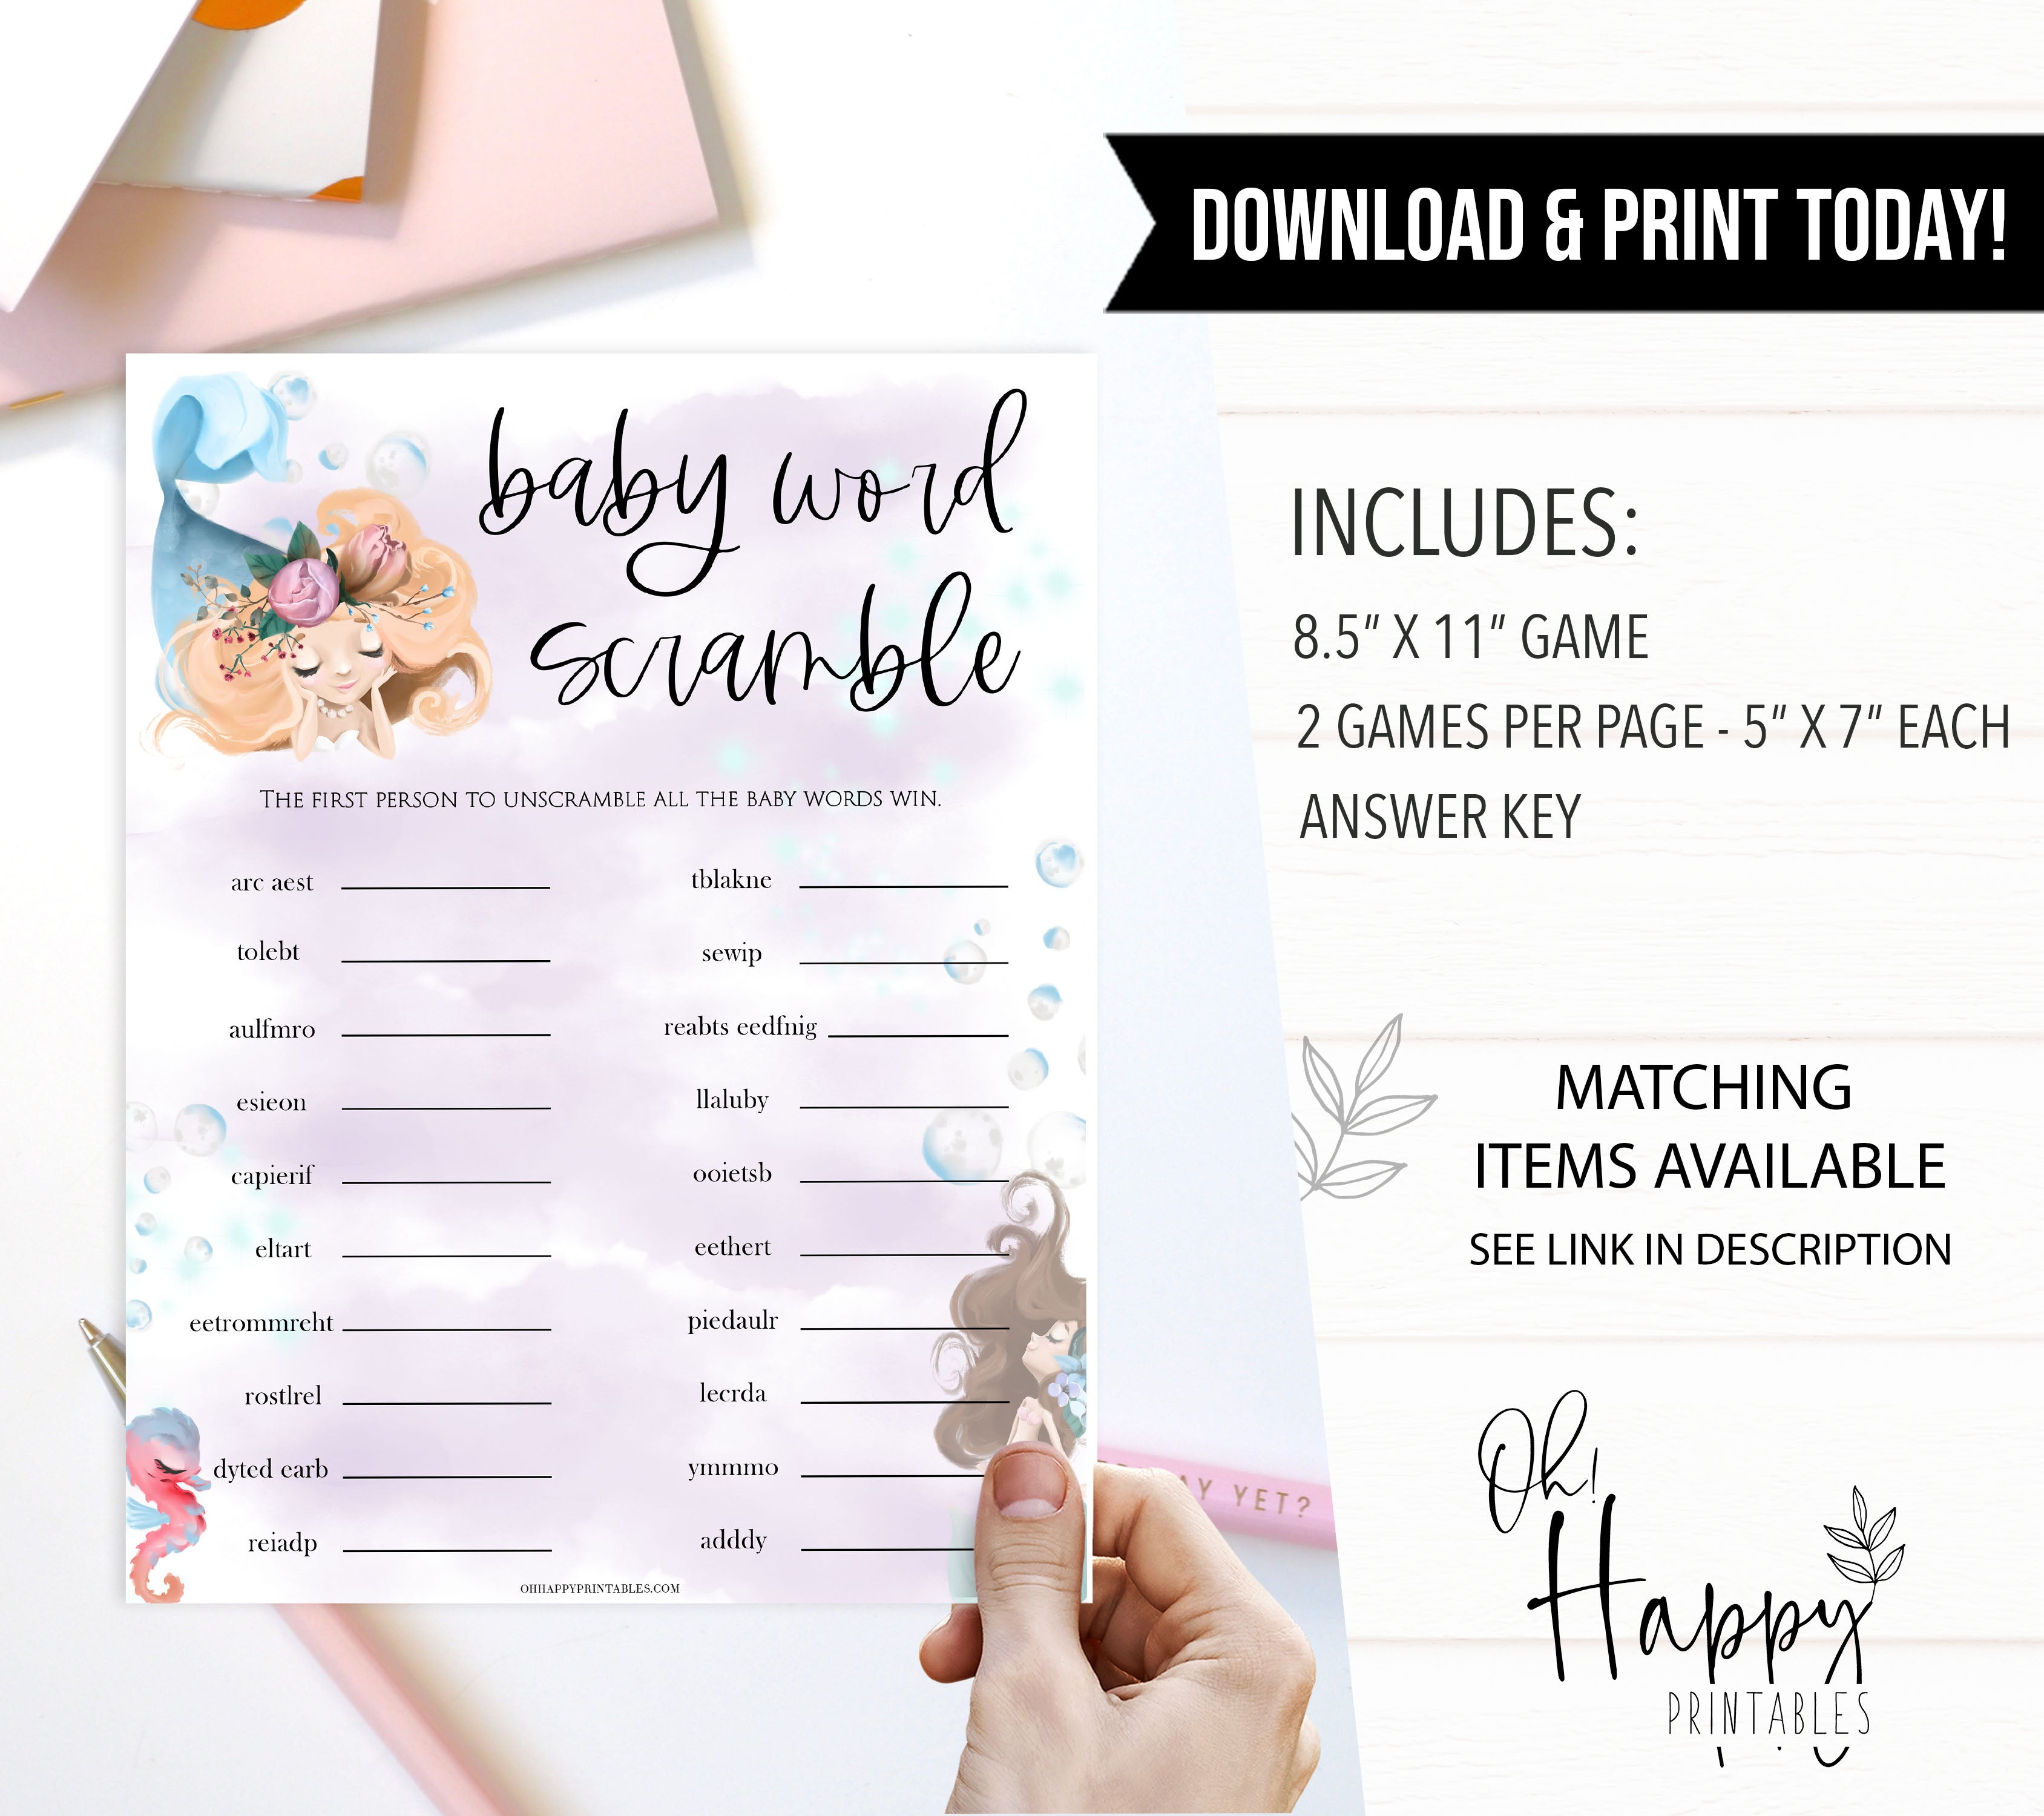 baby word scramble game, Printable baby shower games, little mermaid baby games, baby shower games, fun baby shower ideas, top baby shower ideas, little mermaid baby shower, baby shower games, pink hearts baby shower ideas